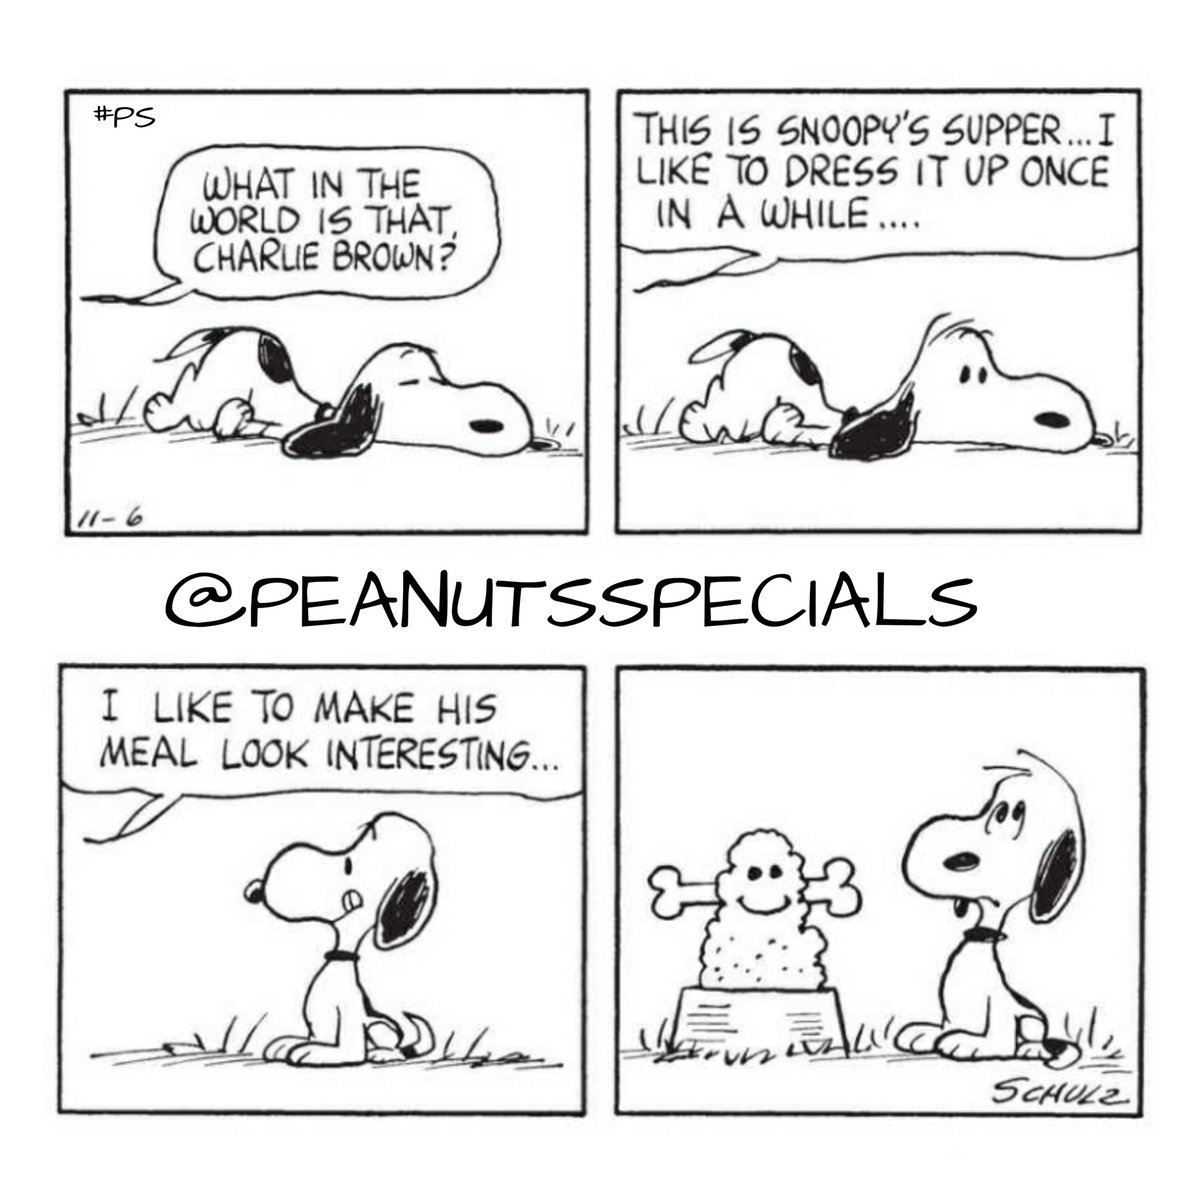 First Appearance: November 6, 1965
#snoopy #whatintheworld #charliebrown #snoopys #supper #dressitup #onceinawhile #meal #look #interesting #peanutsfriday #peanutsstrong #peanutshome #staysafe #schulz #ps #pnts #peanuts #peanutscoloringbook #officialpeanutsspecials